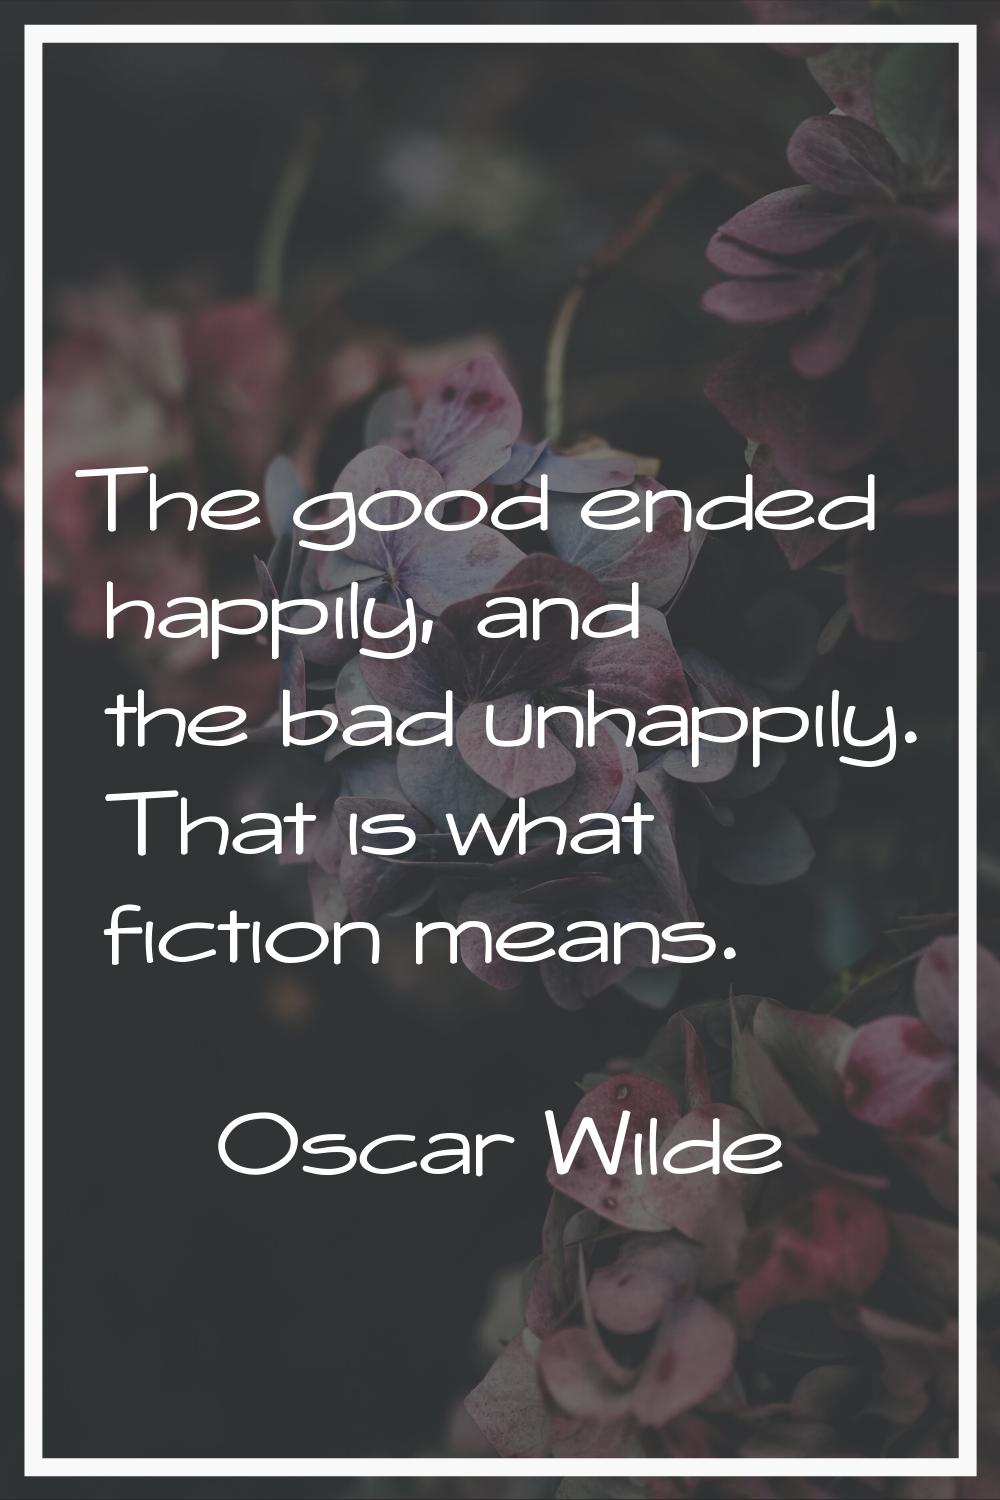 The good ended happily, and the bad unhappily. That is what fiction means.